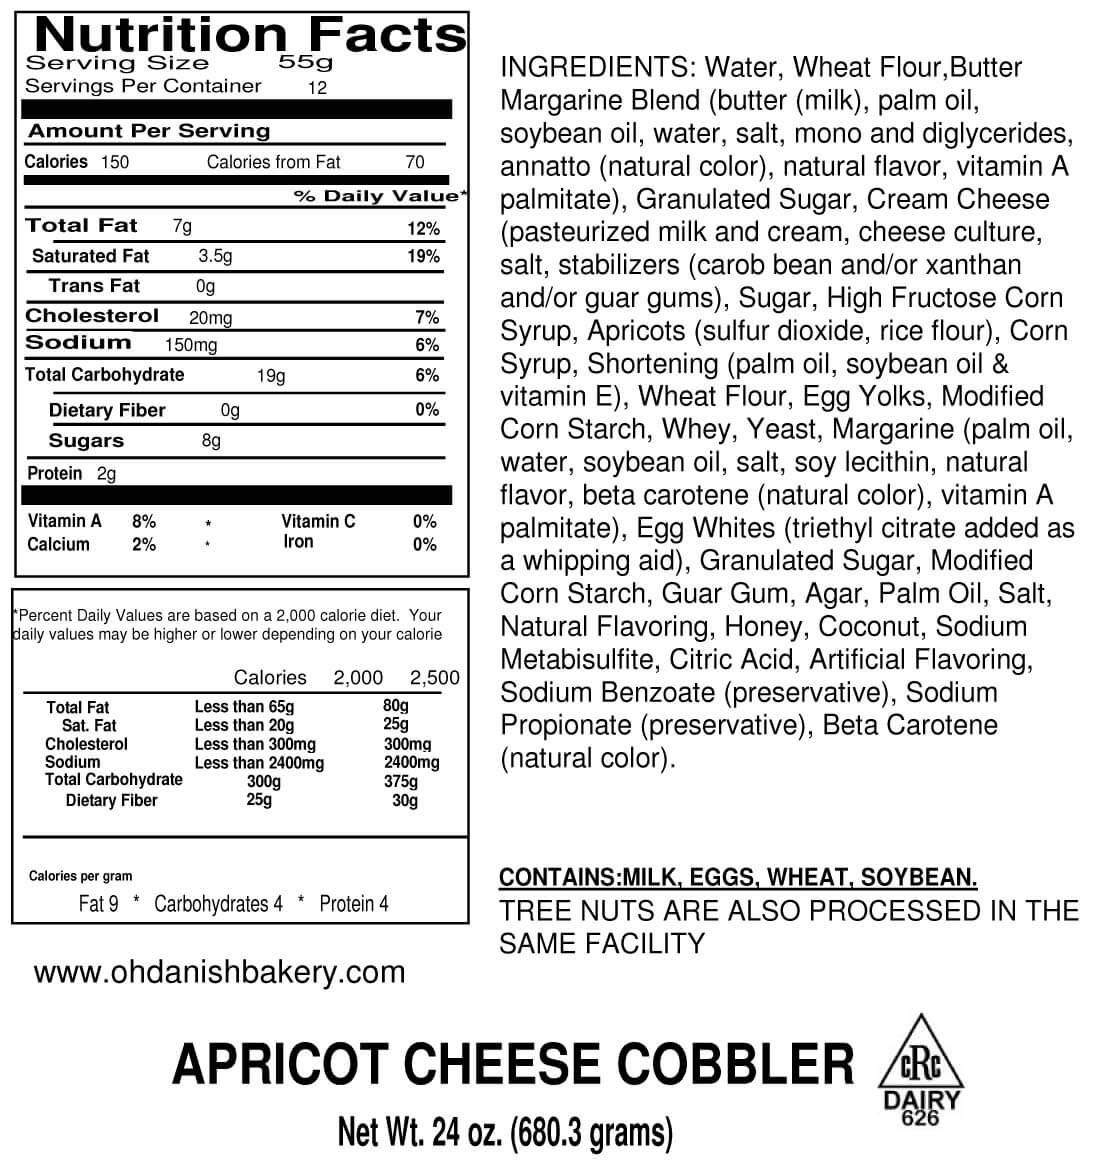 Nutritional Label for Apricot Cheese Cobbler Kringle